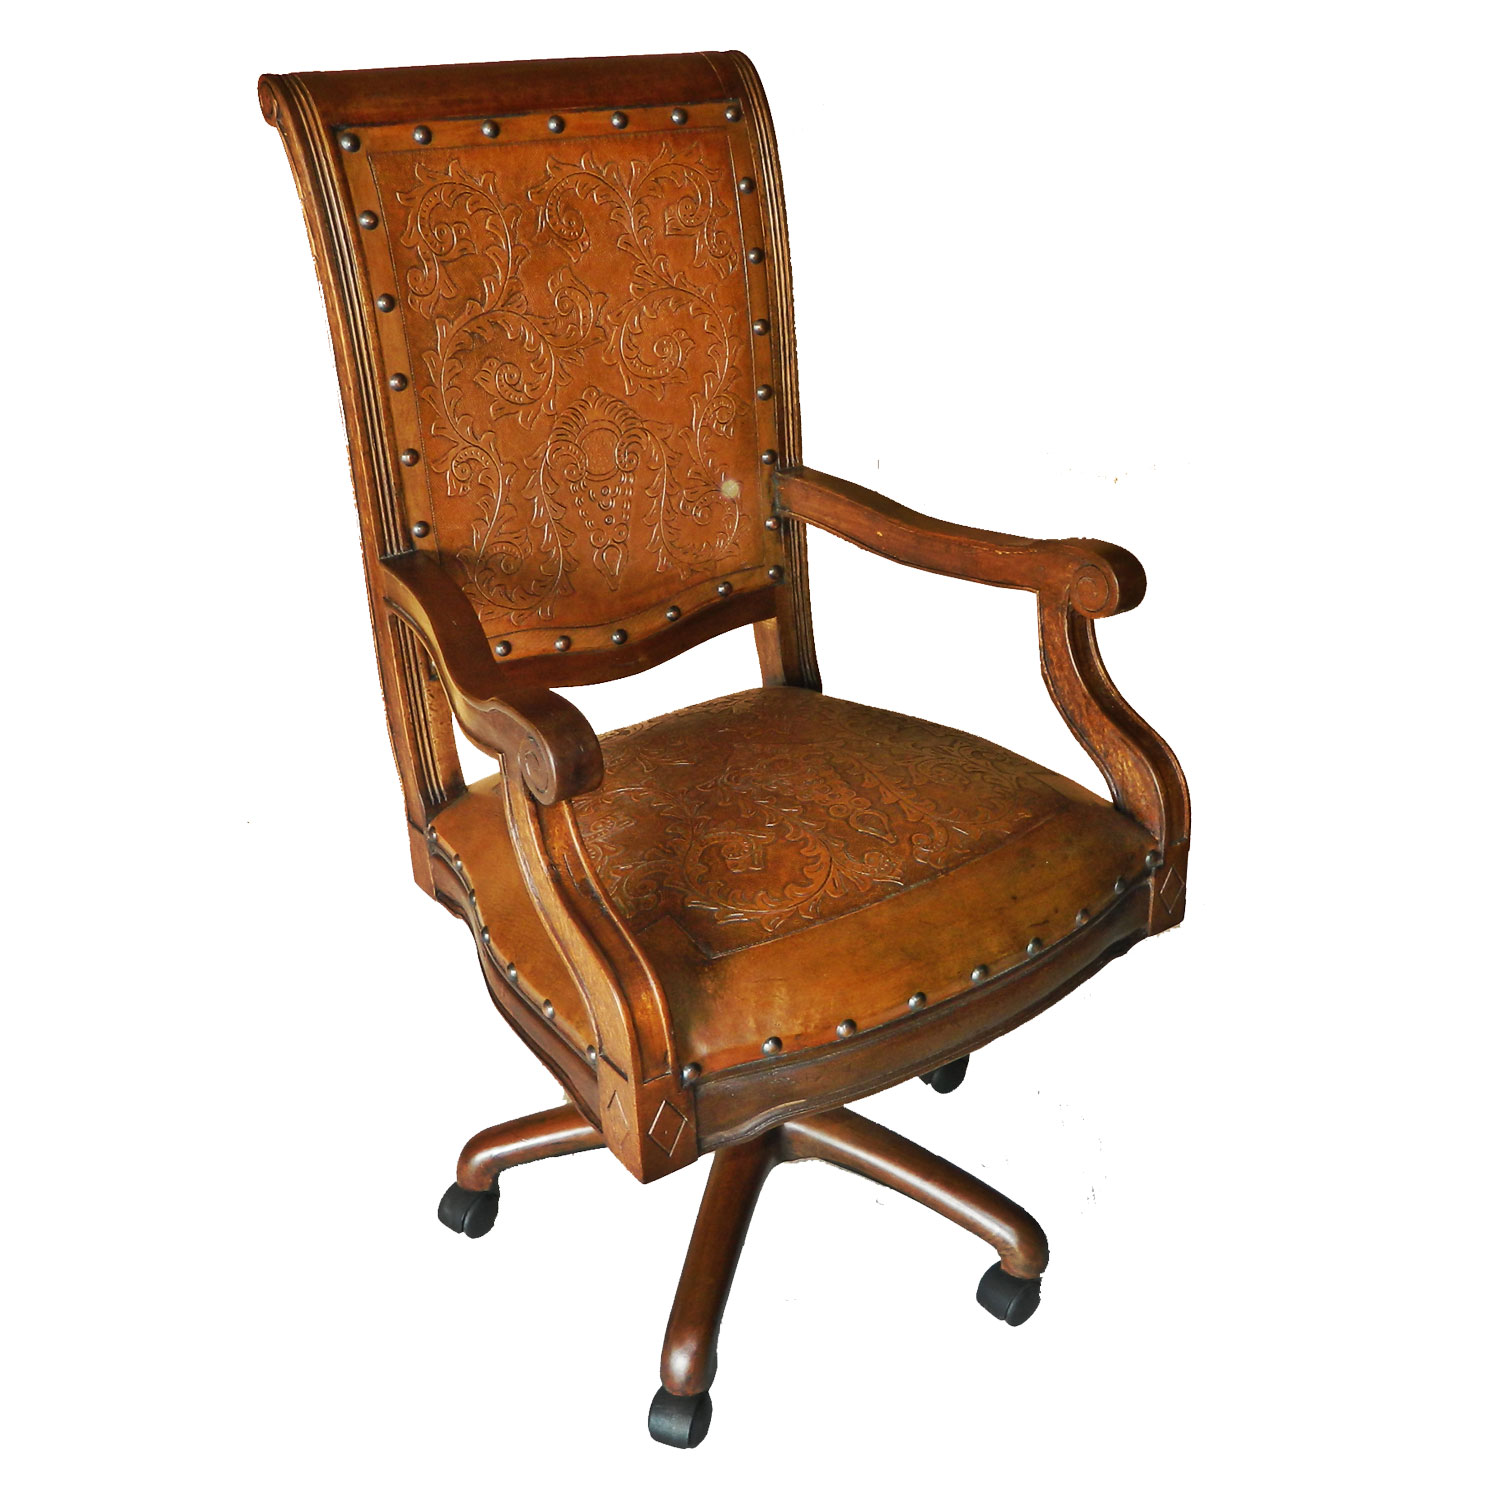 Imperial Office Chair, Colonial, Rustic New World Trading